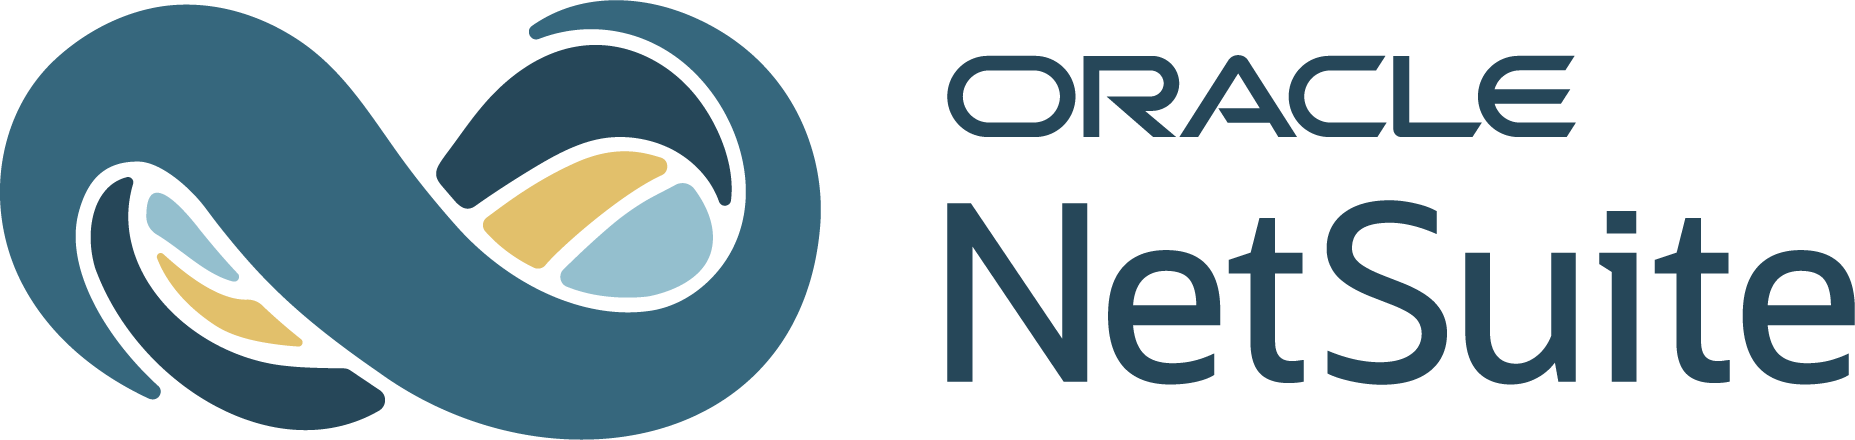 Oracle NetSuite Products logo